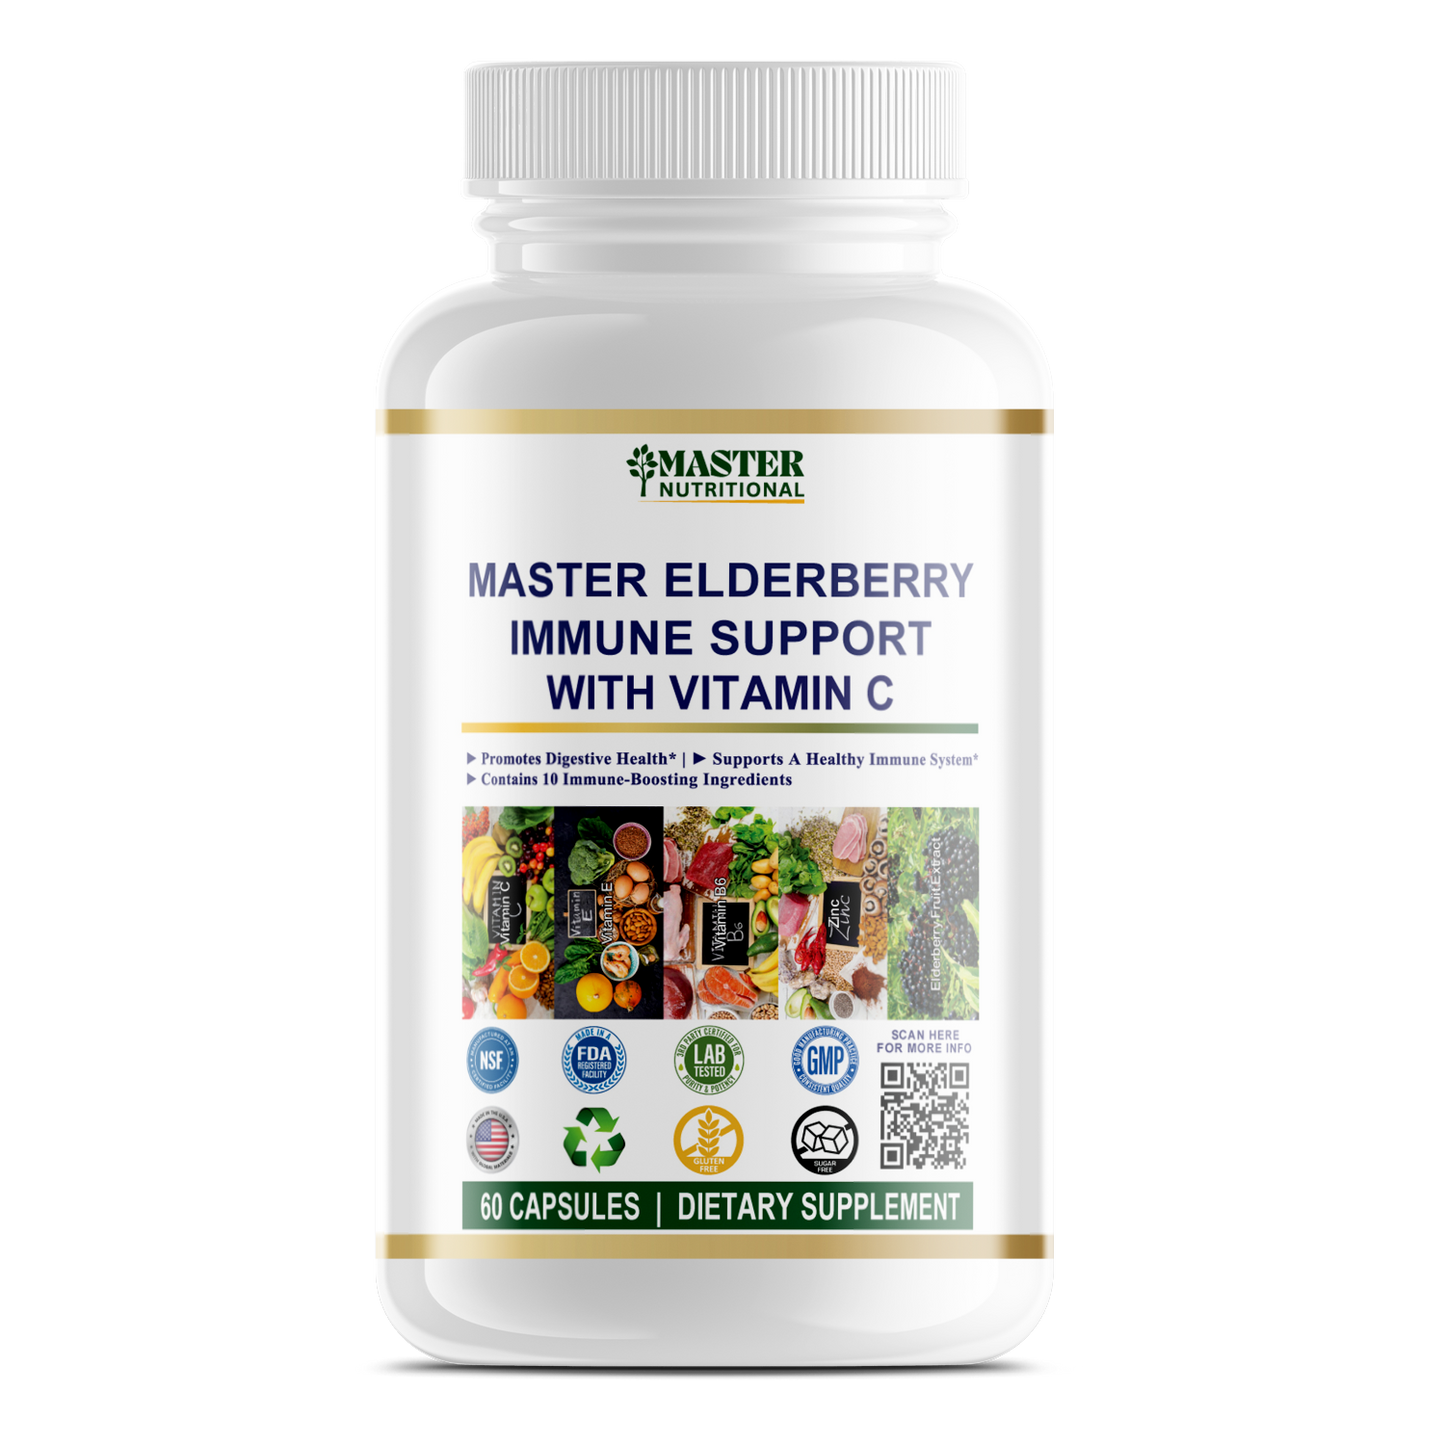 Master Elderberry Immune Support With Vitamin C - Ultimate Defense for a Healthy Immune